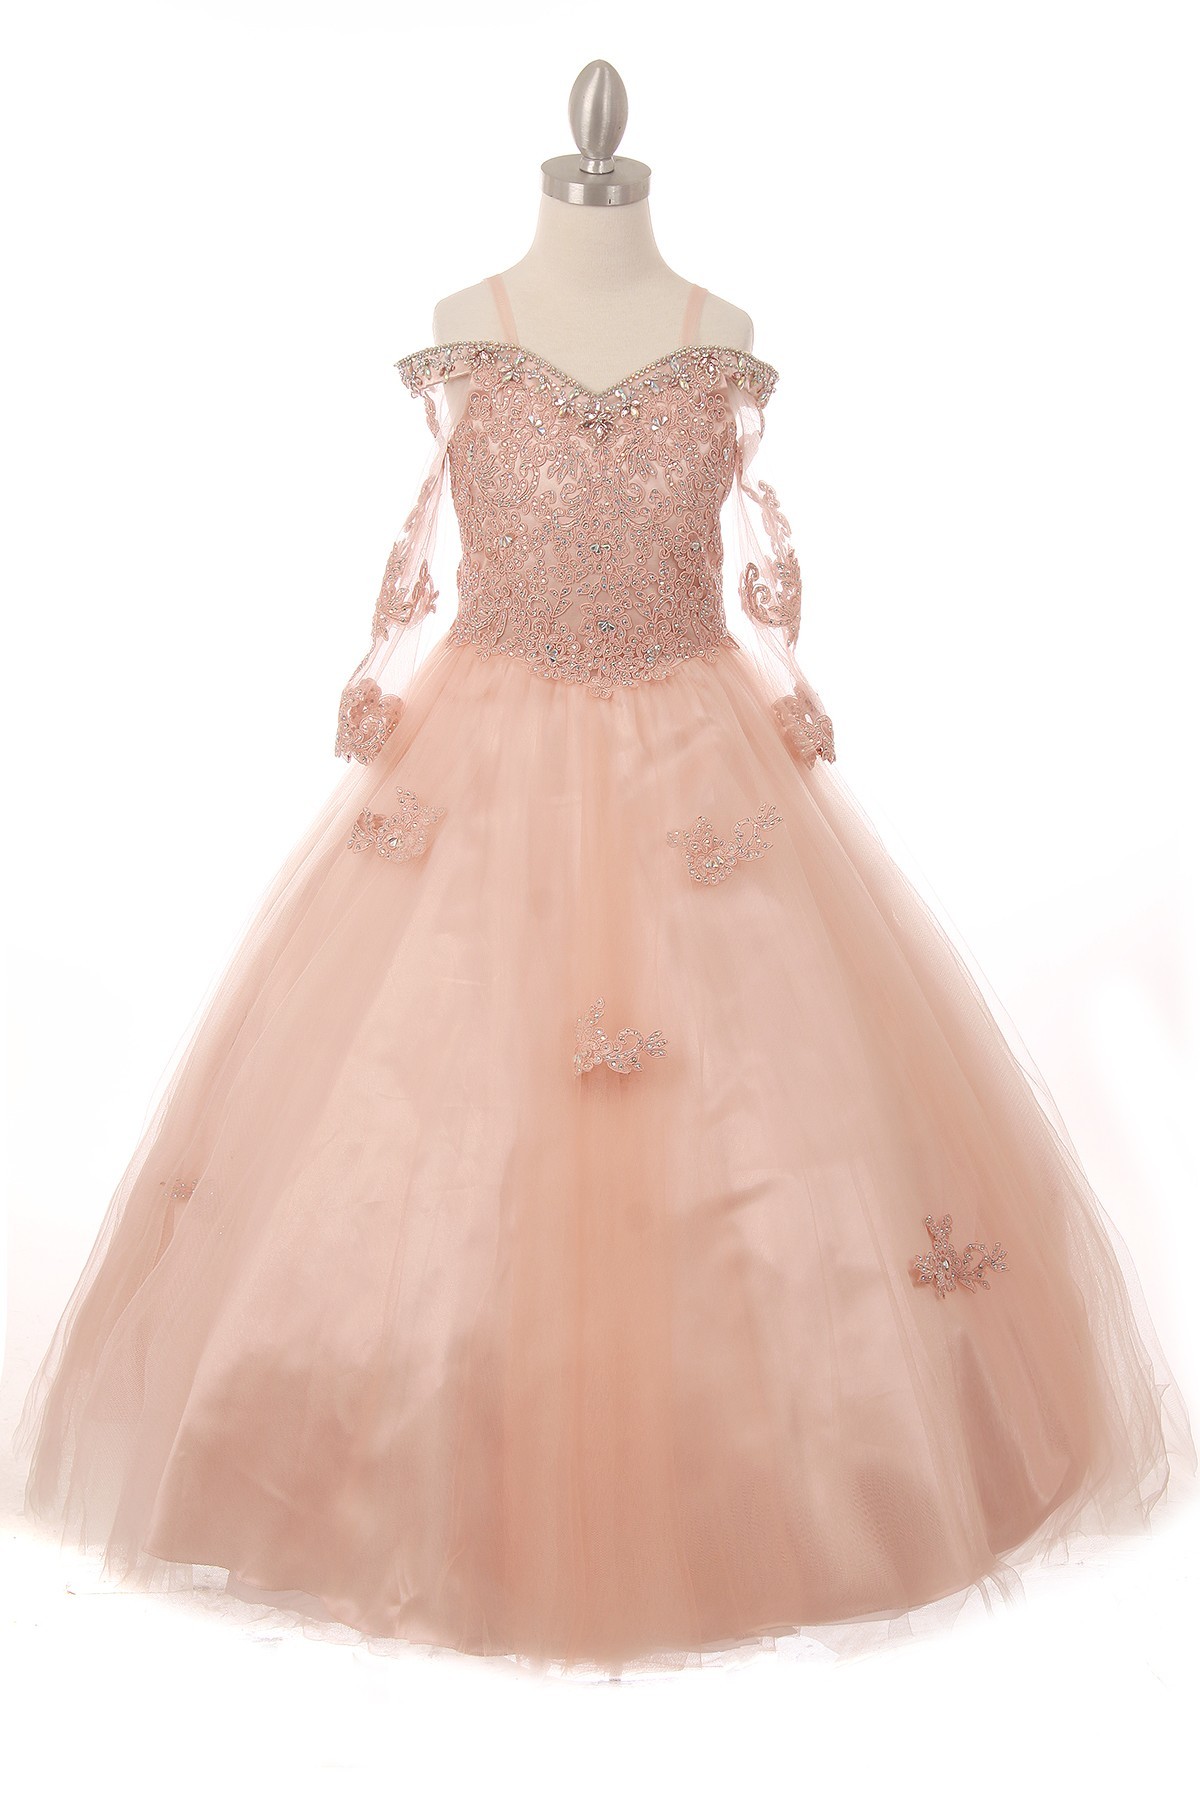 Pageant dresses for little girls